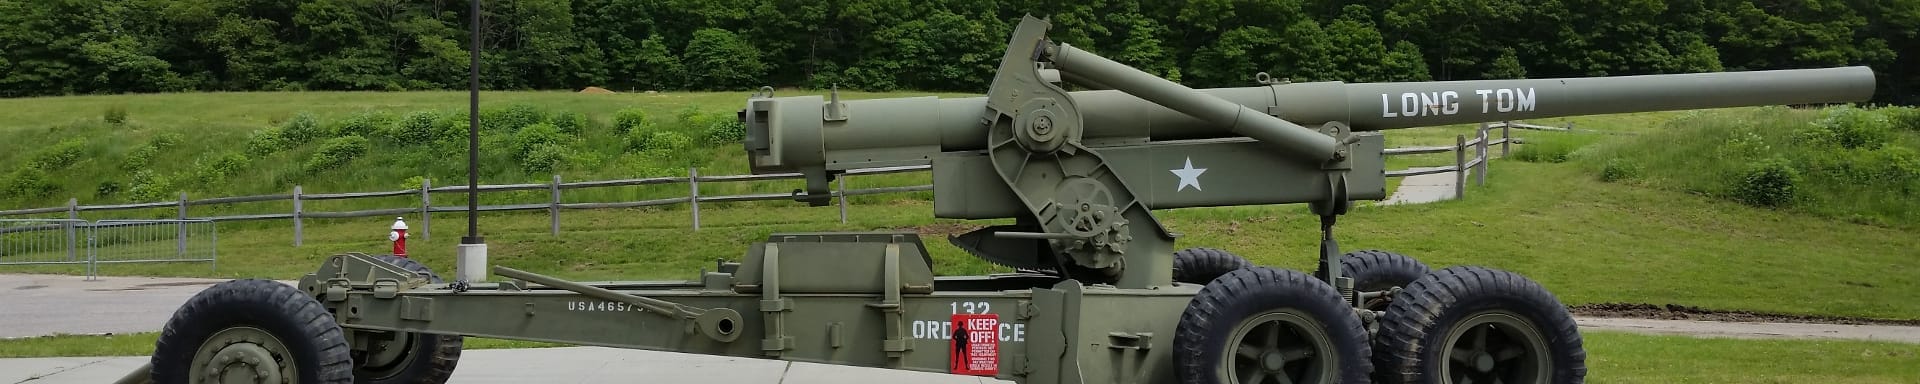 the museum of american armor long tom slice